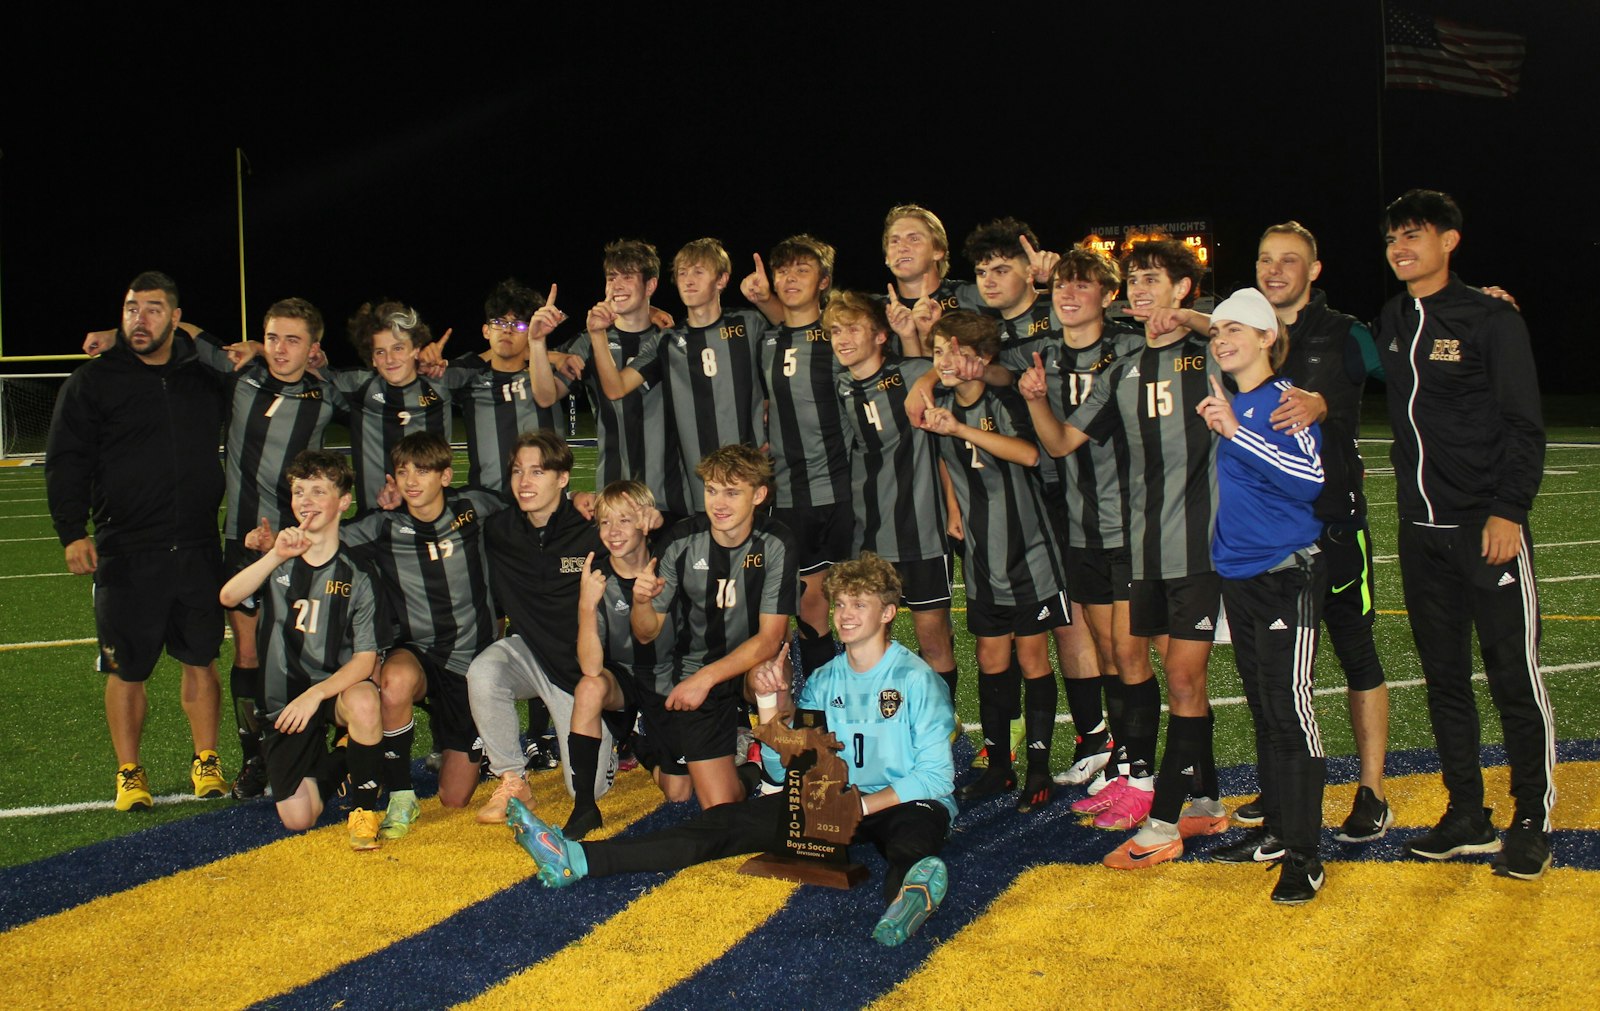 Bishop Foley earned its first regional championship in boys soccer since 1997, and now prepares to play Kalamazoo Hackett Catholic in Wednesday’s Division 4 state semi-final. (Photo by Anthony Soma | Special to Detroit Catholic)